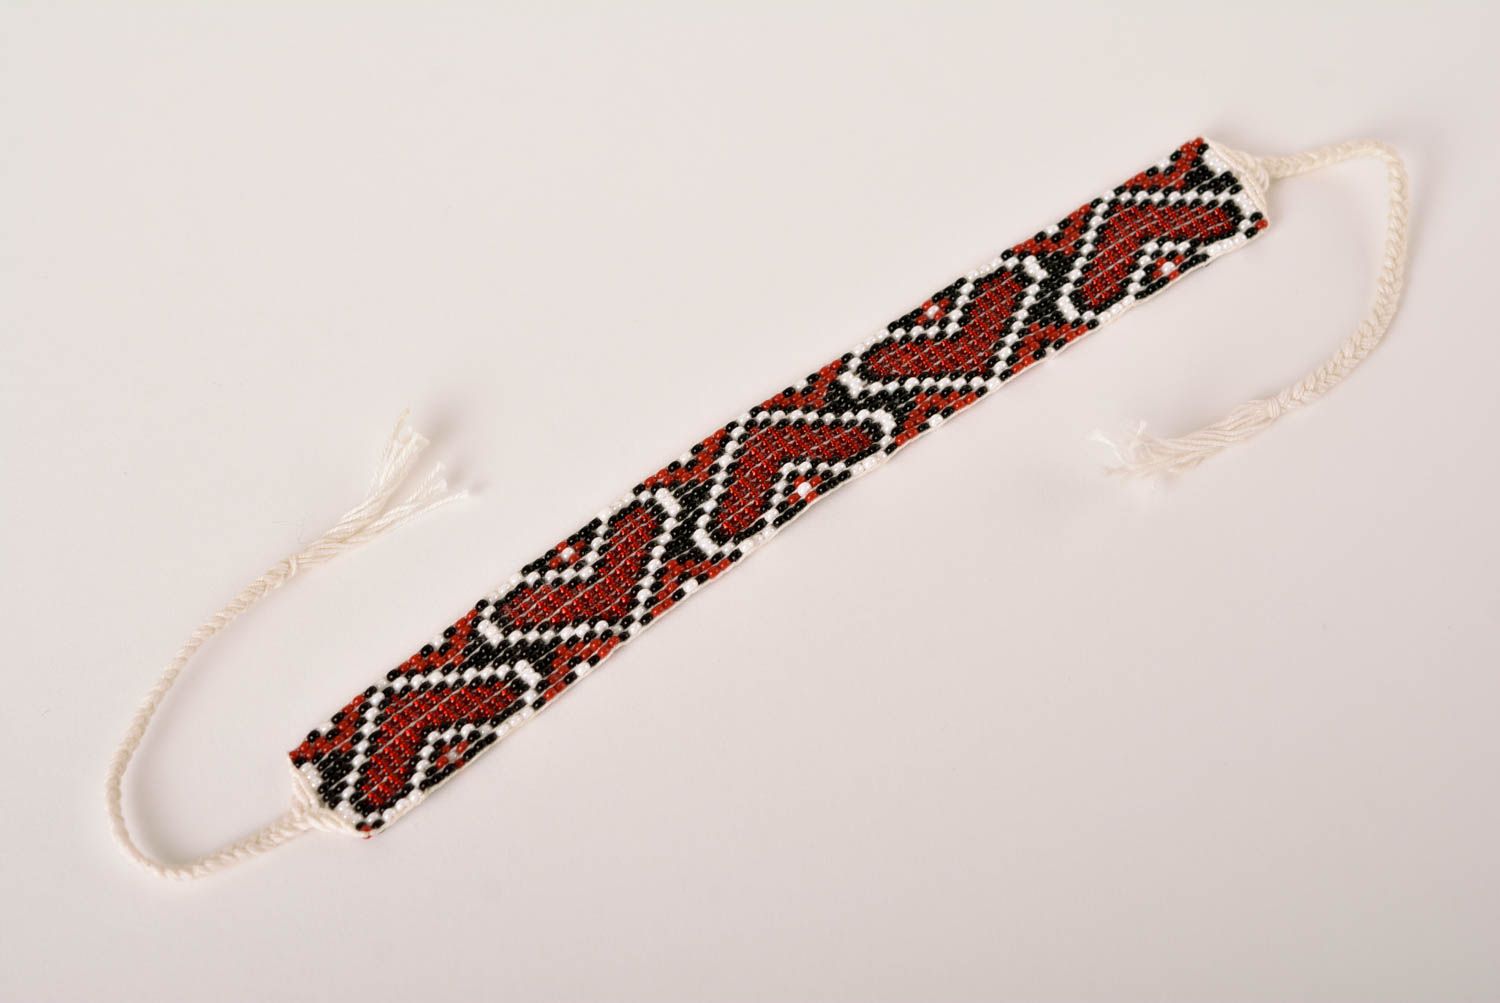 Handmade beaded bracelet with Ukrainian style ornament in red, black, and white color photo 4